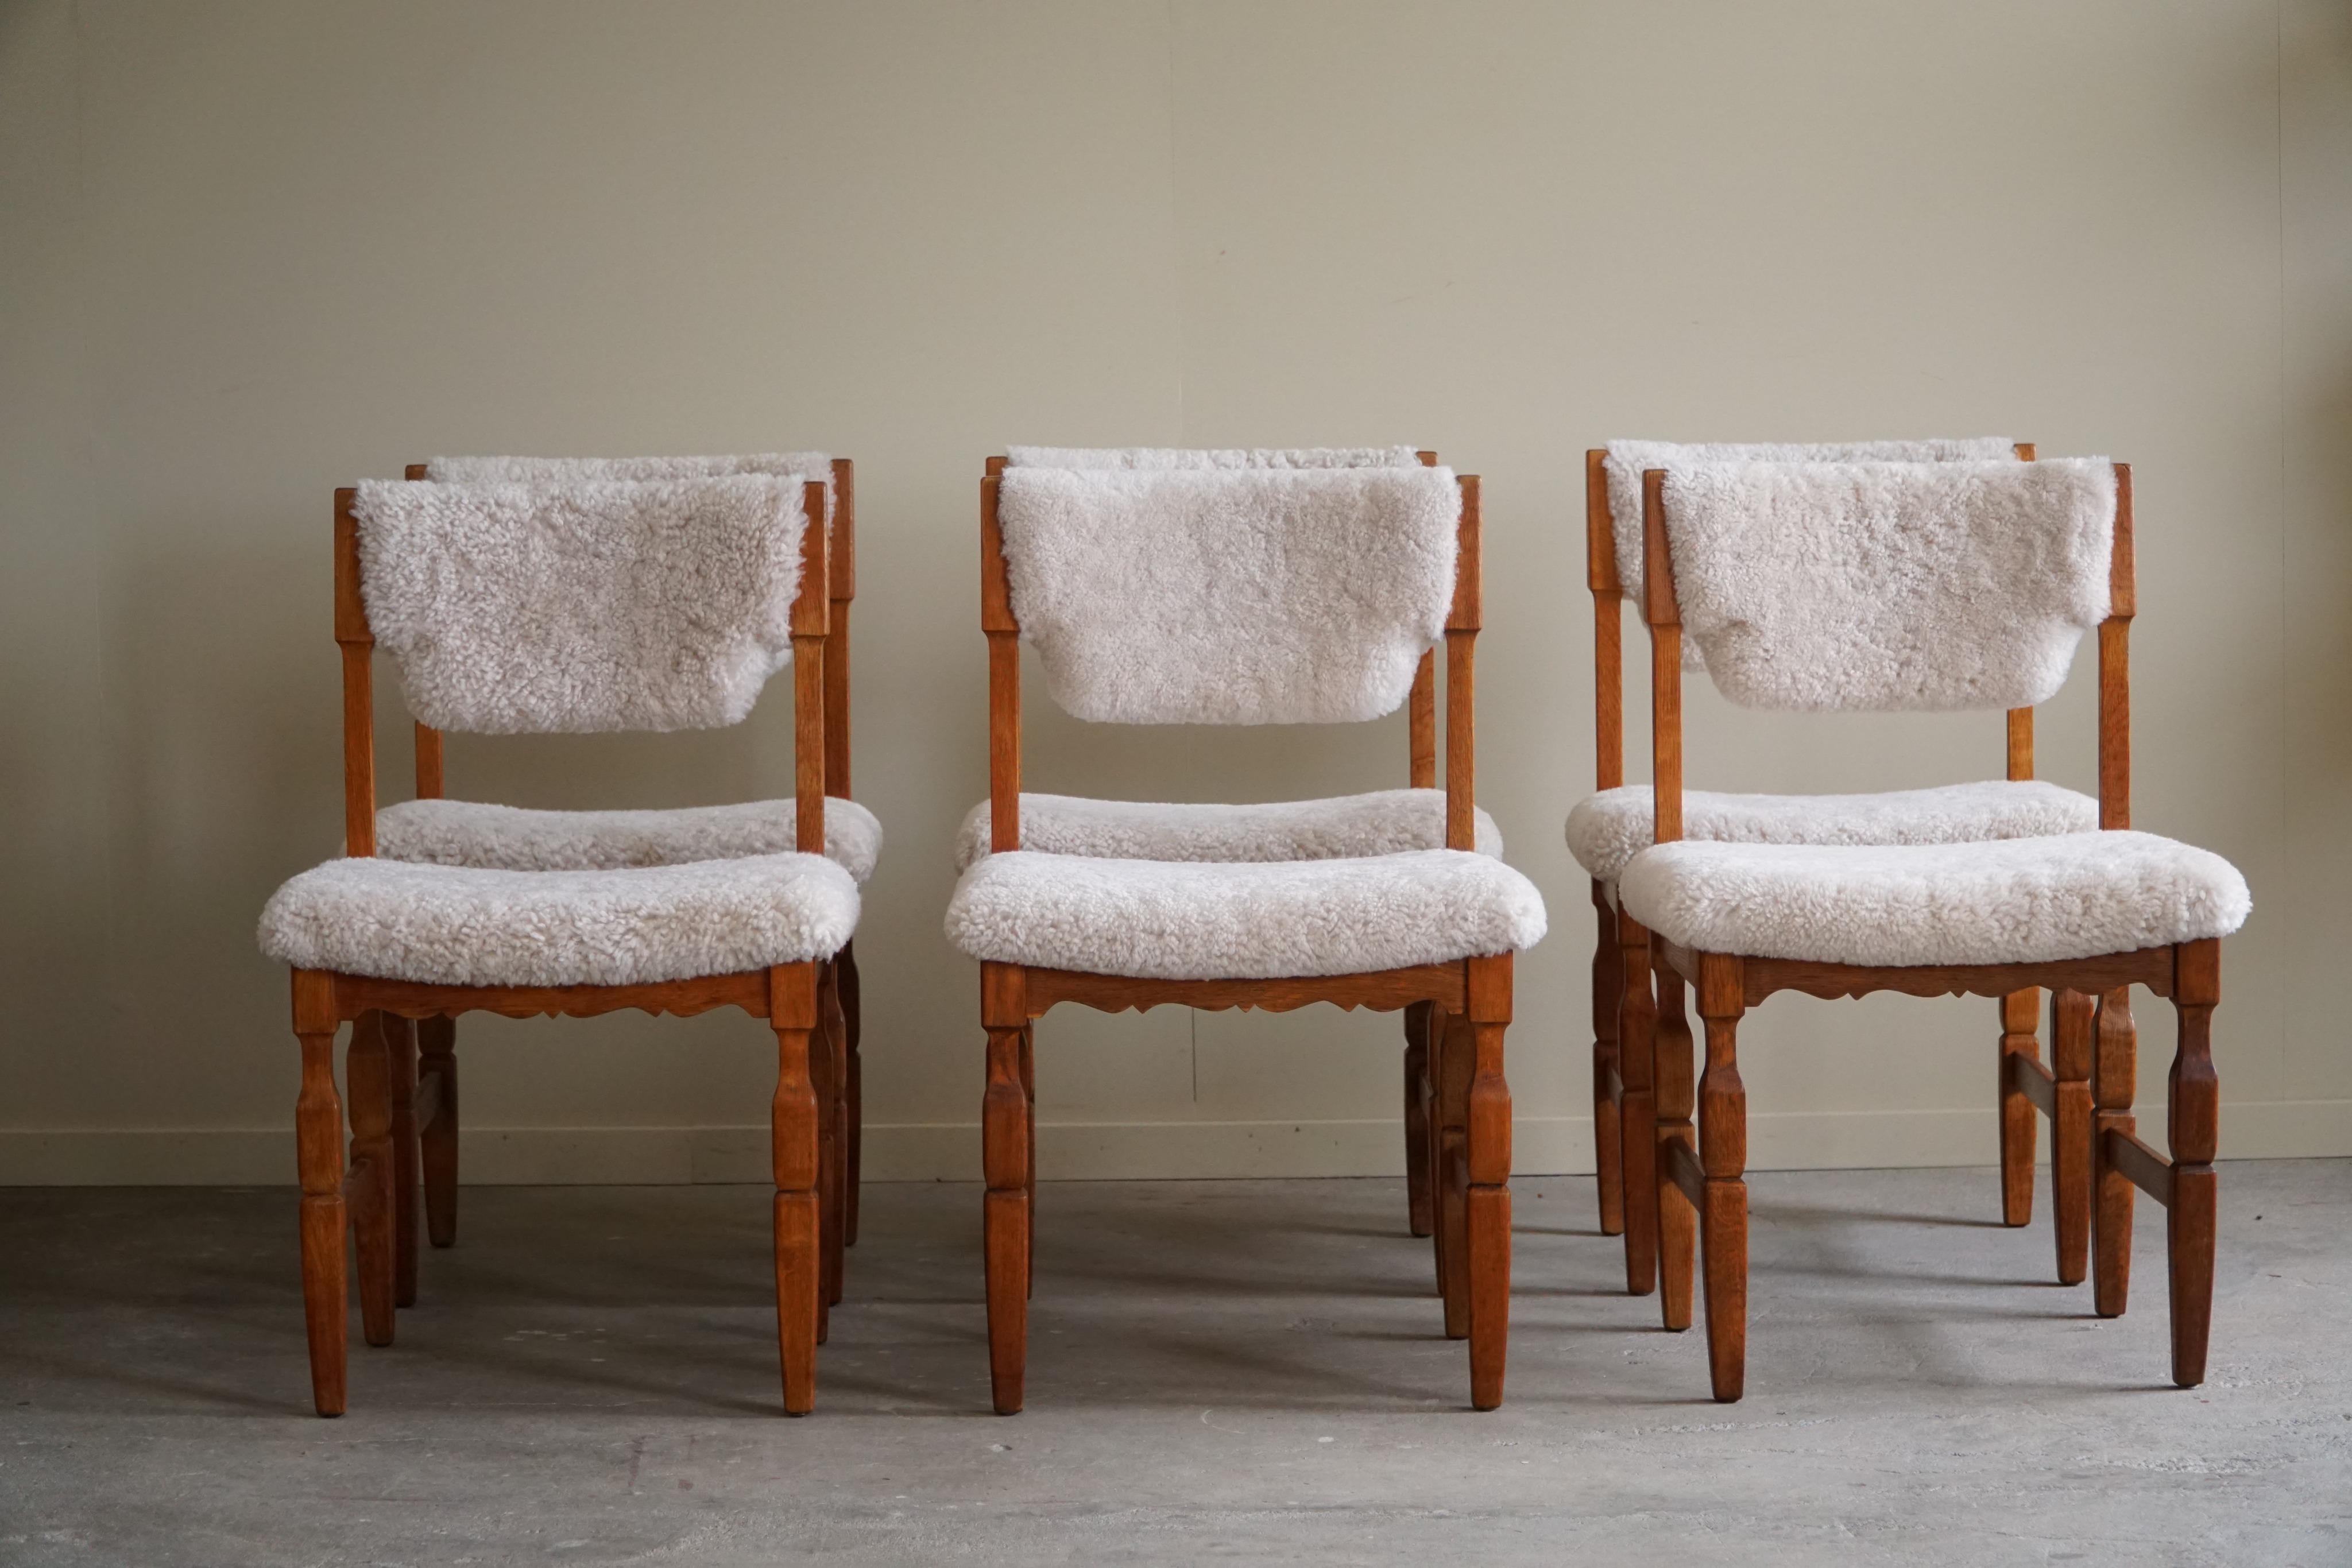 Set of 6 Dining Chairs in Oak & Lambswool, Danish Mid Century Modern, 1960s For Sale 11